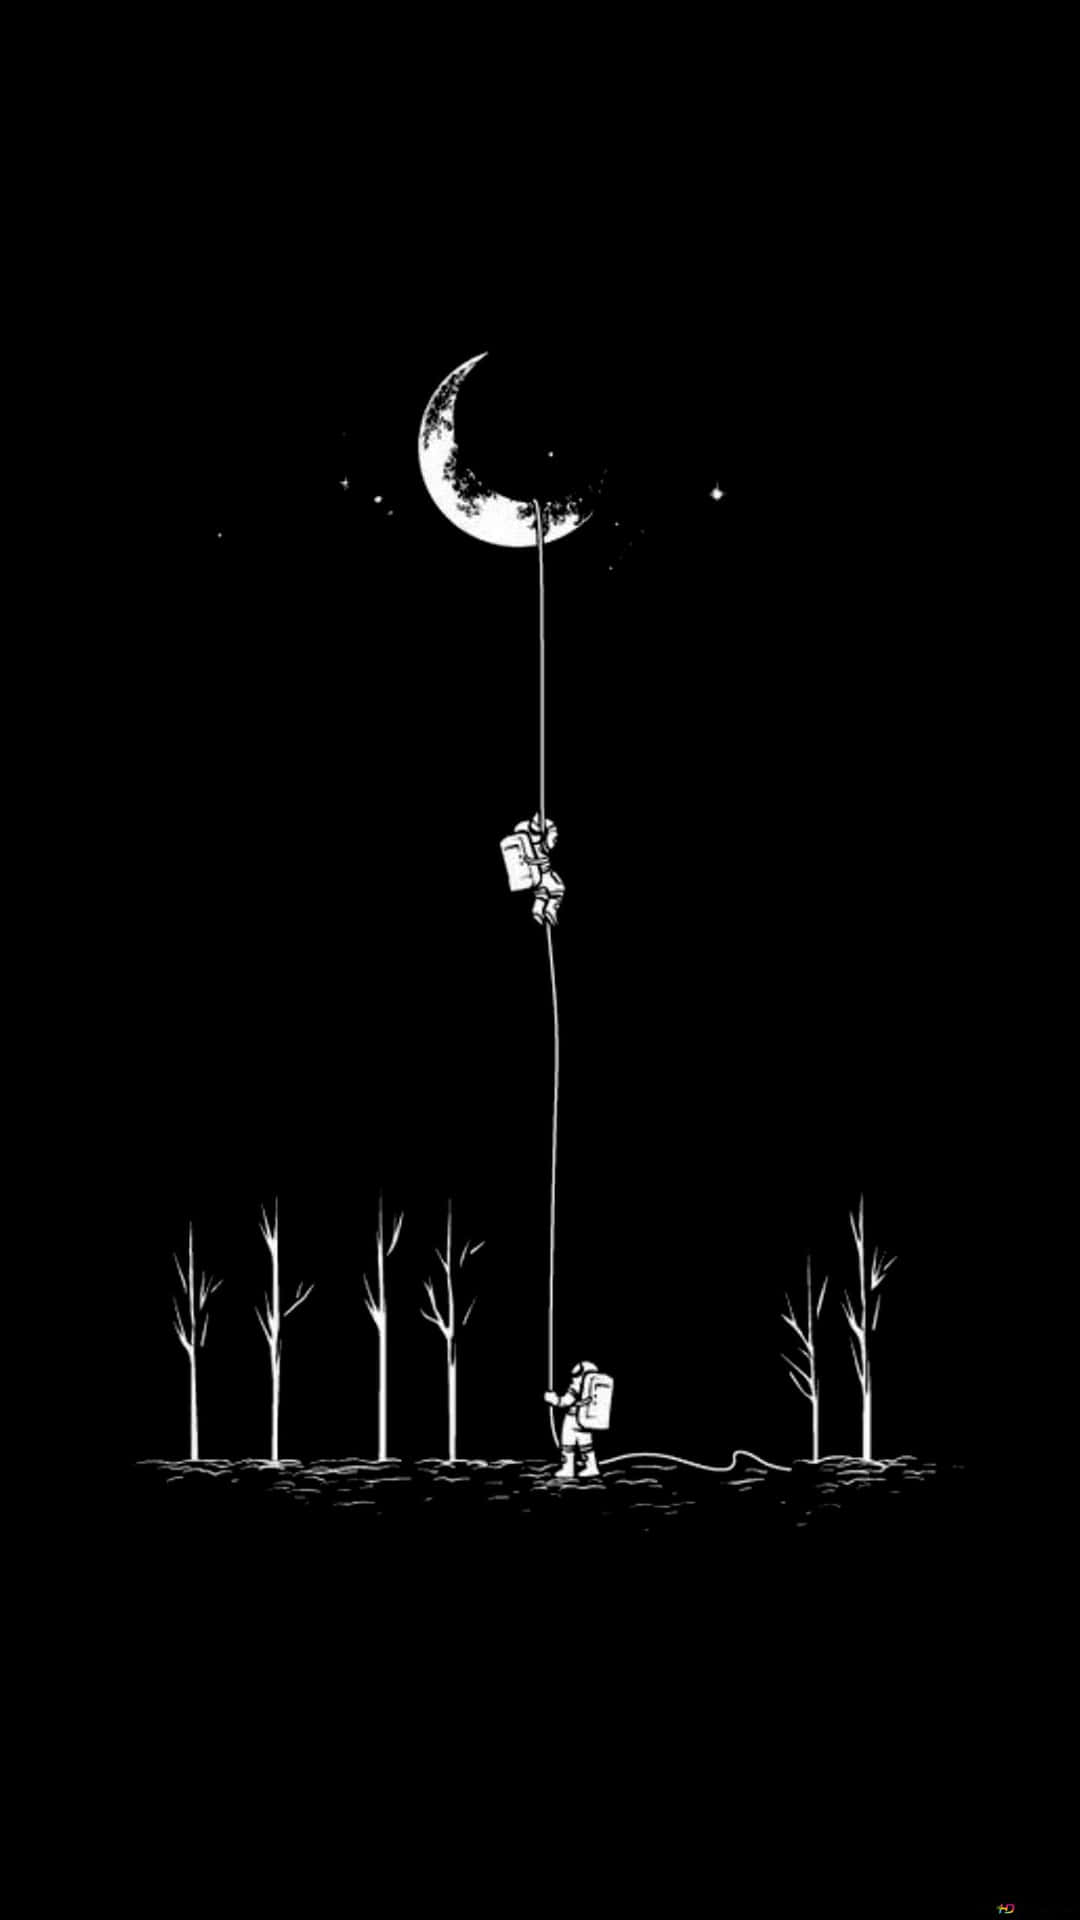 A Man Is Hanging From A Rope In The Dark Wallpaper